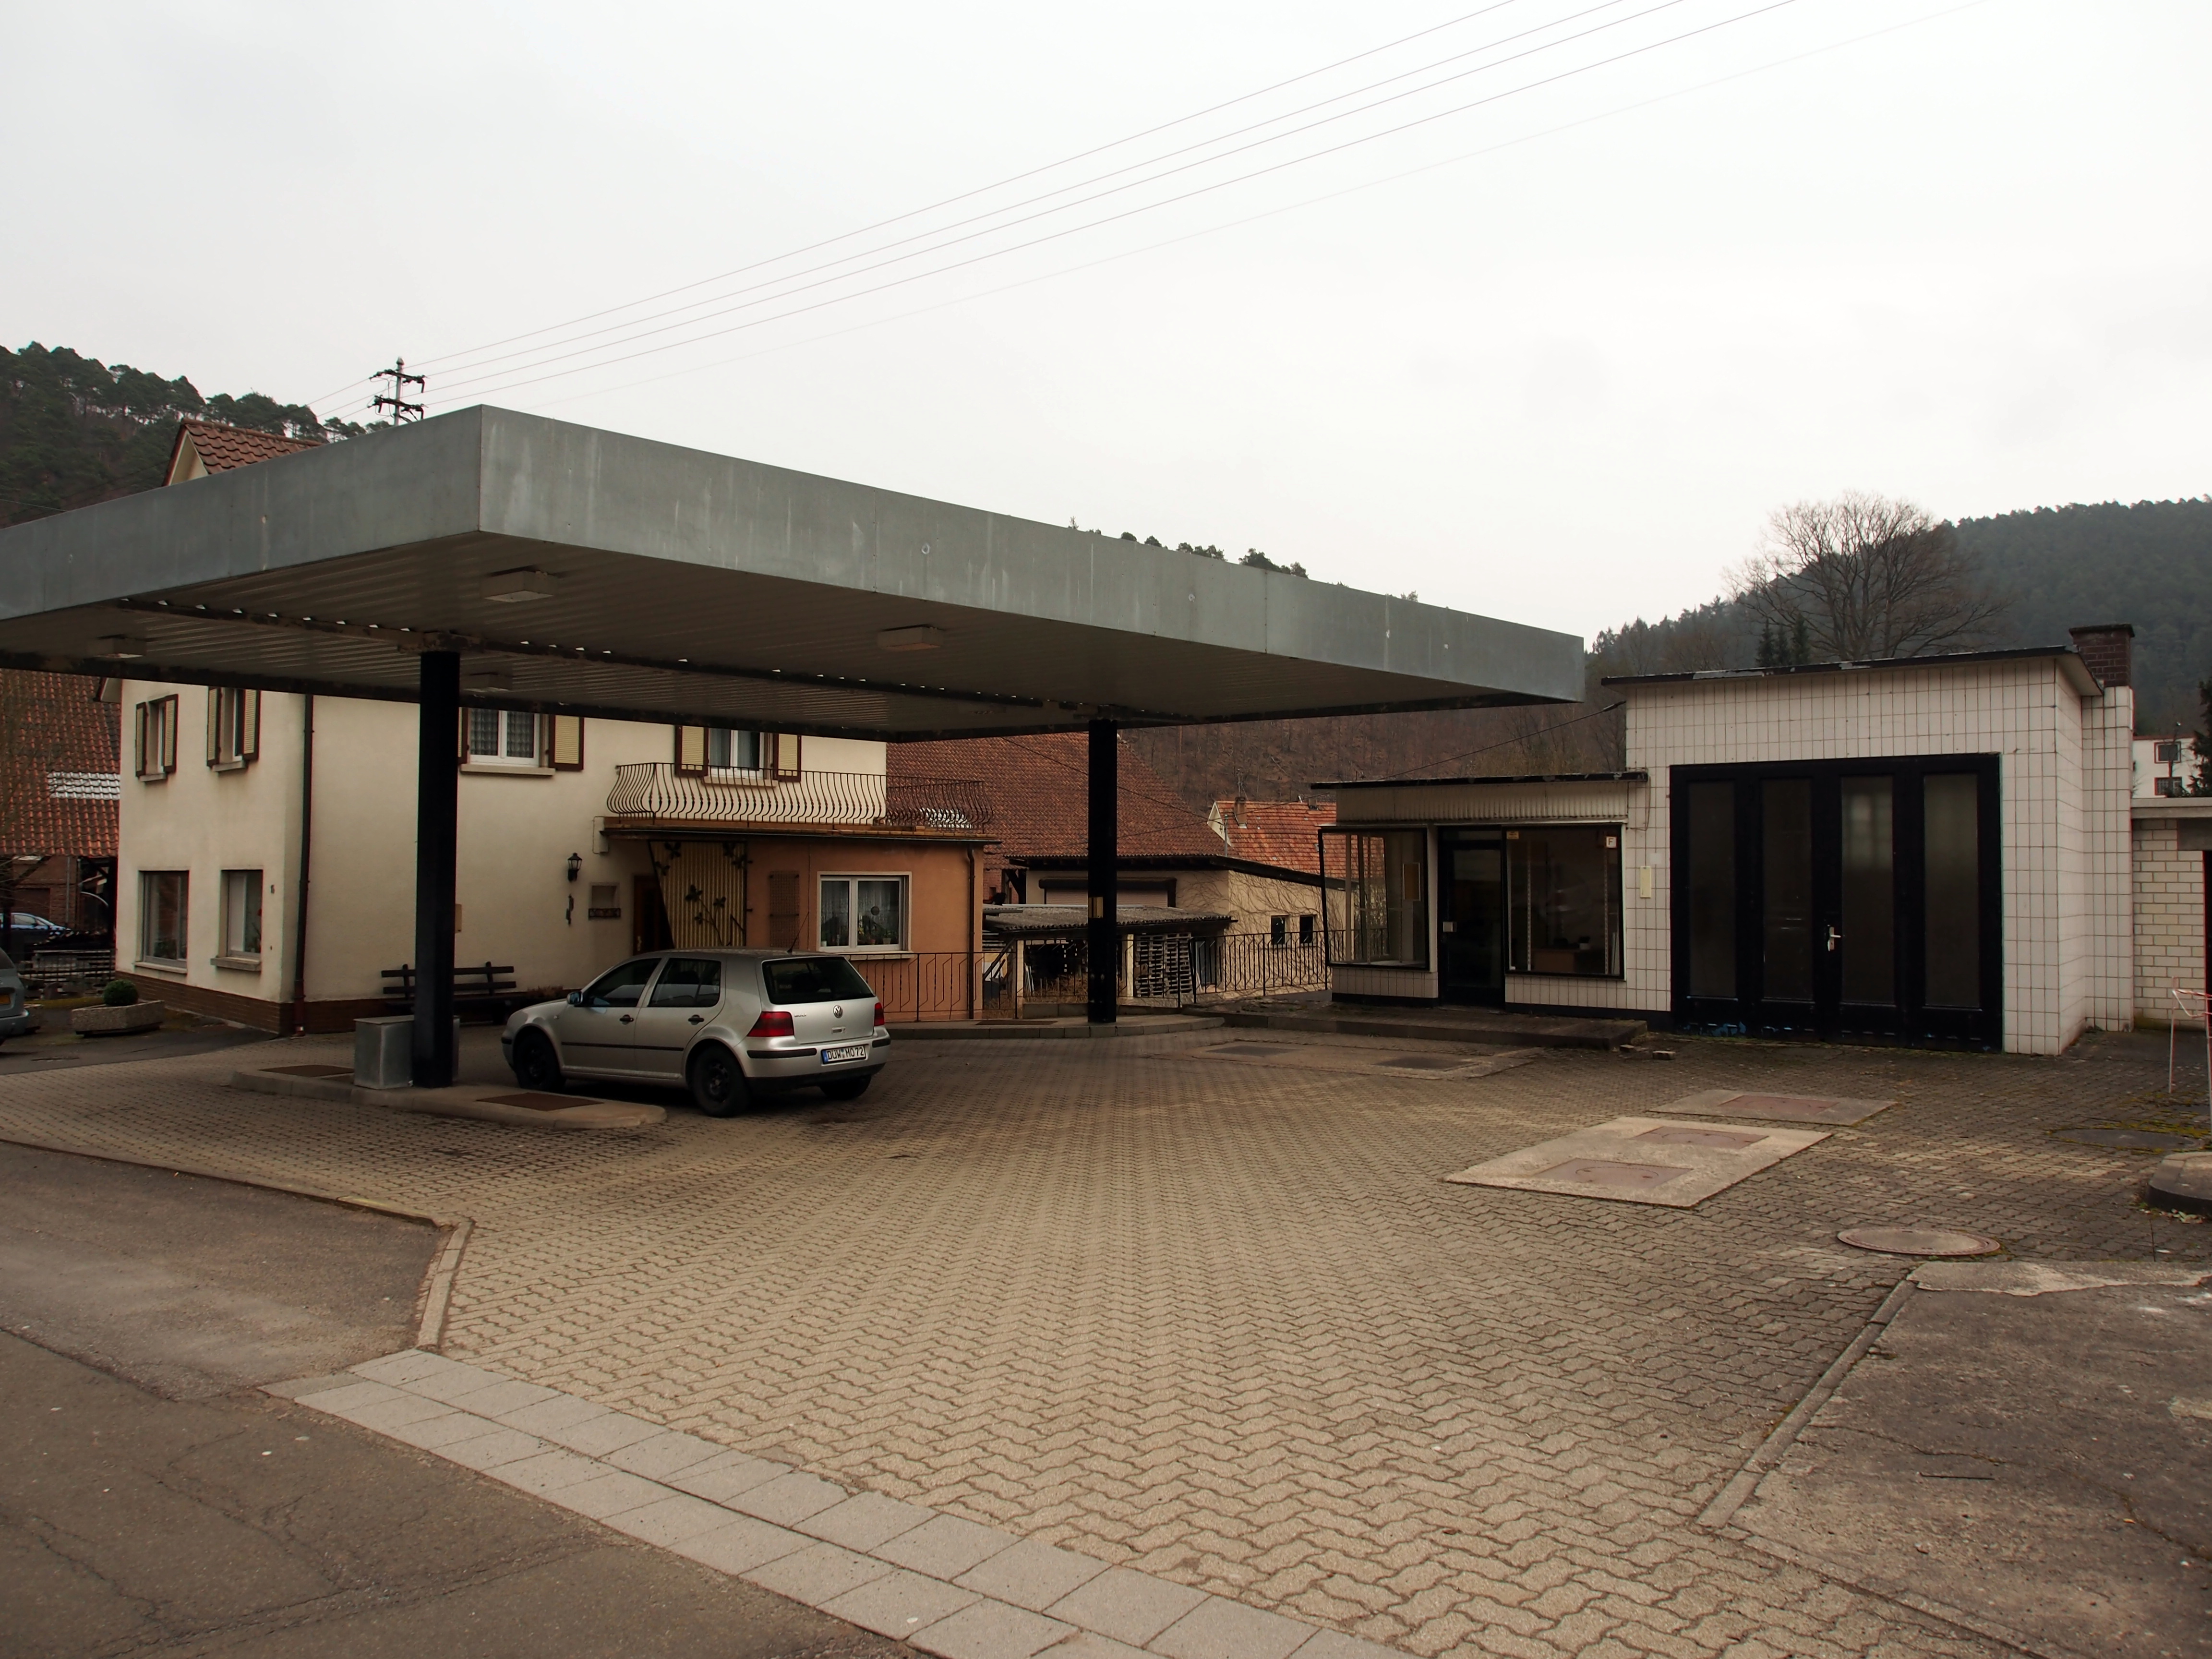 File:Old Petrol station at Elmstein pic4.JPG - Wikimedia Commons